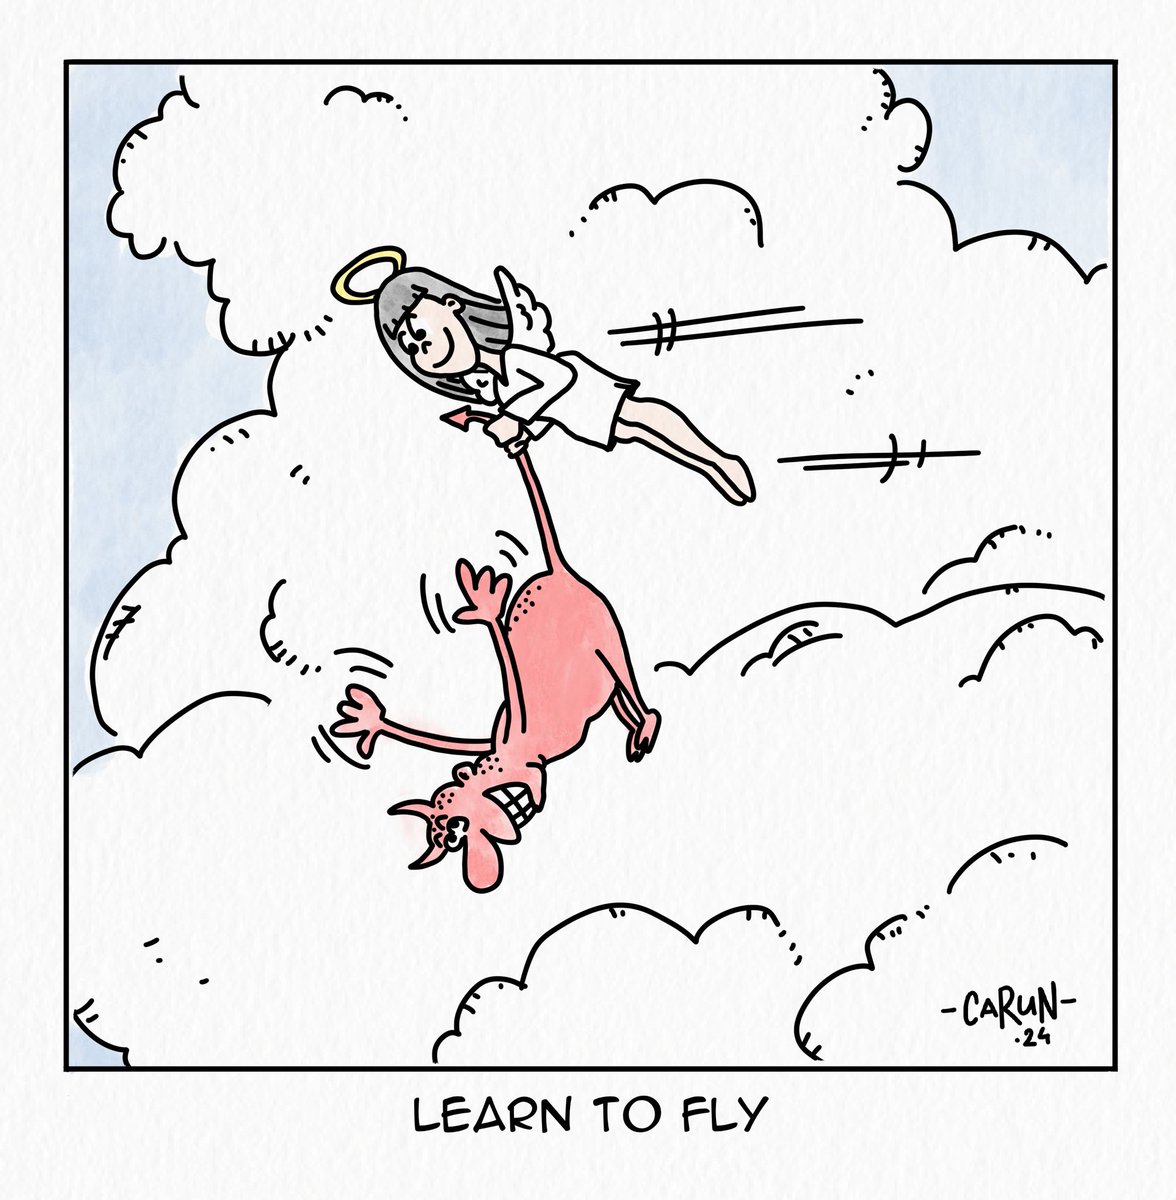 🎵 Foo Fighters - Learn To Fly 🎵

#art #artwork #sketch #doodle #drawing #inking #illustration #cartoon #cartoonists #cartoonillustration #comics #comicstrip #gagcartoon #foofighters #learntofly #song #angel #devil #rock #funny